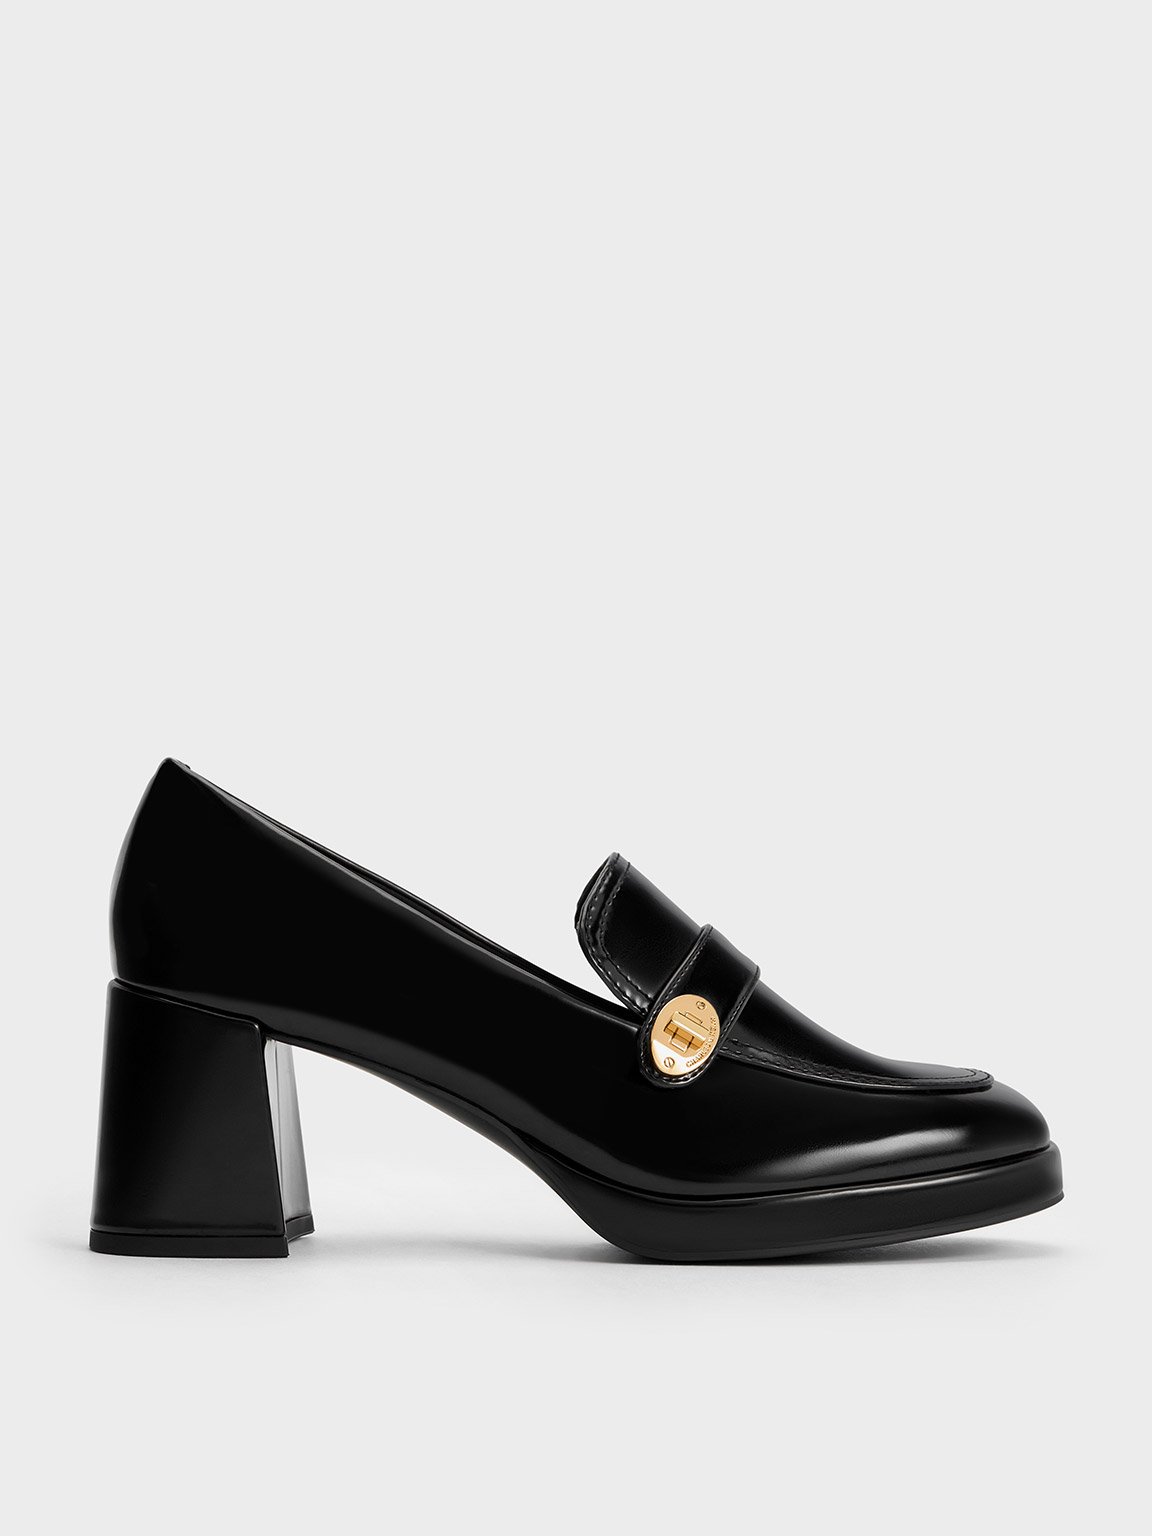 Charles & Keith Metallic Accent Loafer Pumps In Black Box